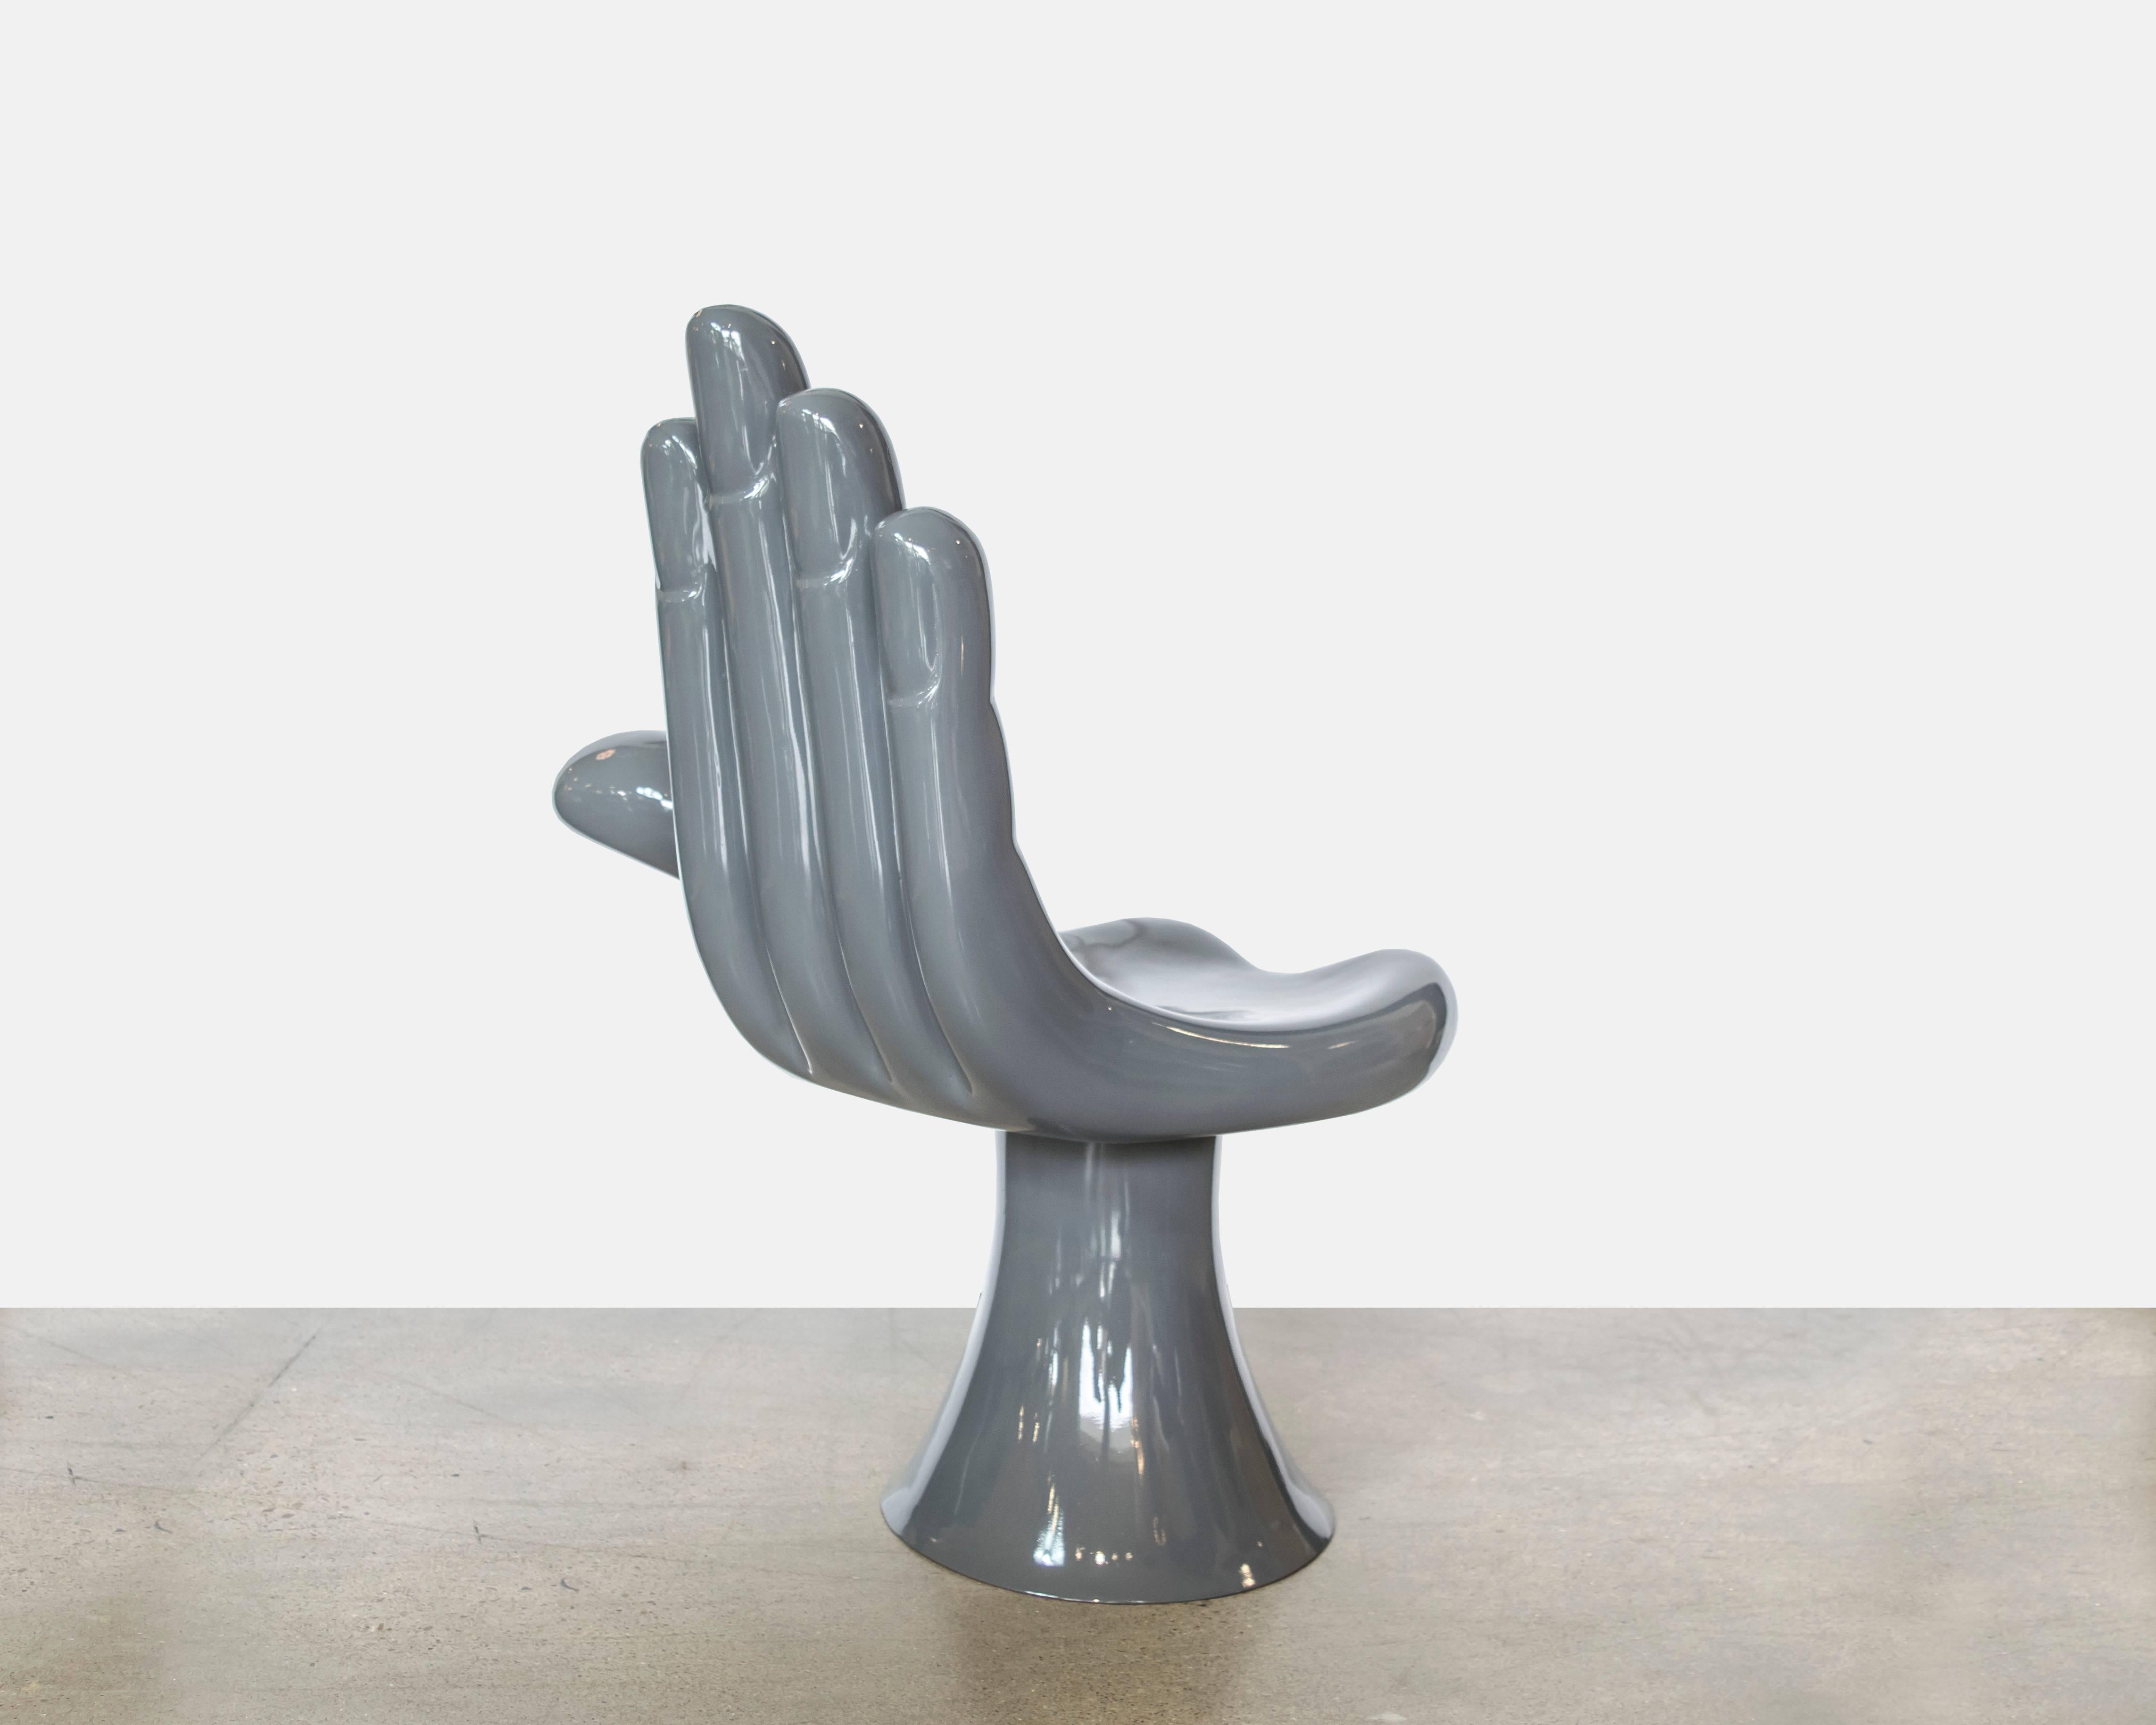 Mexican Pedro Friedeberg Hand Chair in Charcoal Fiberglass, Limited Edition 1/3